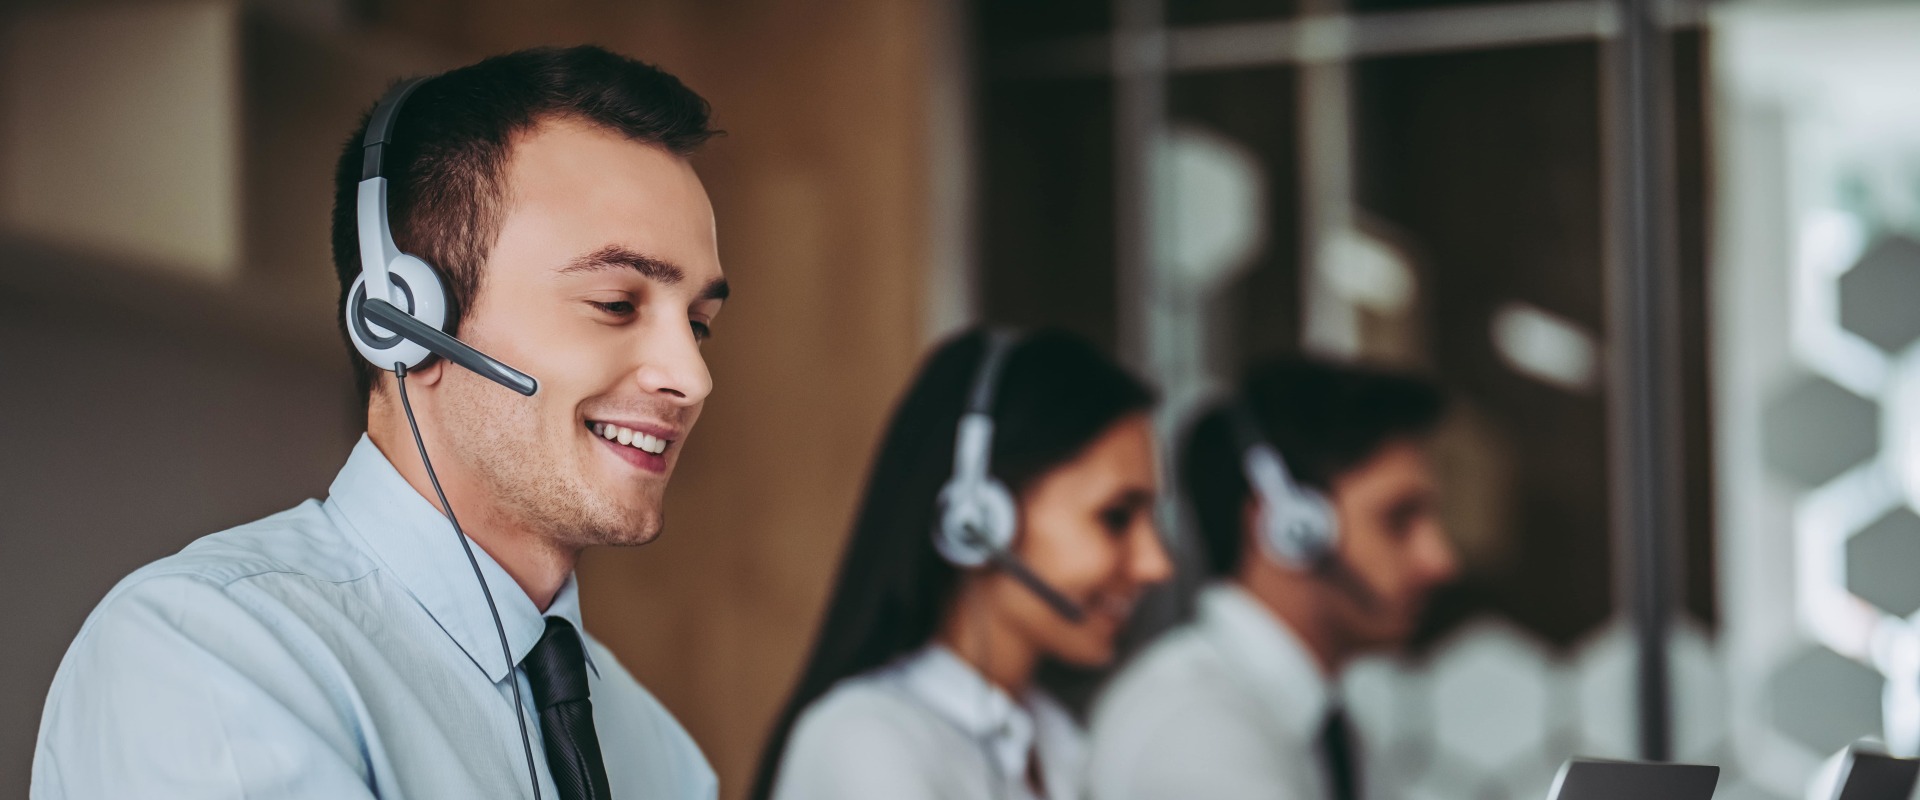 What are the 3 most important things in customer service?